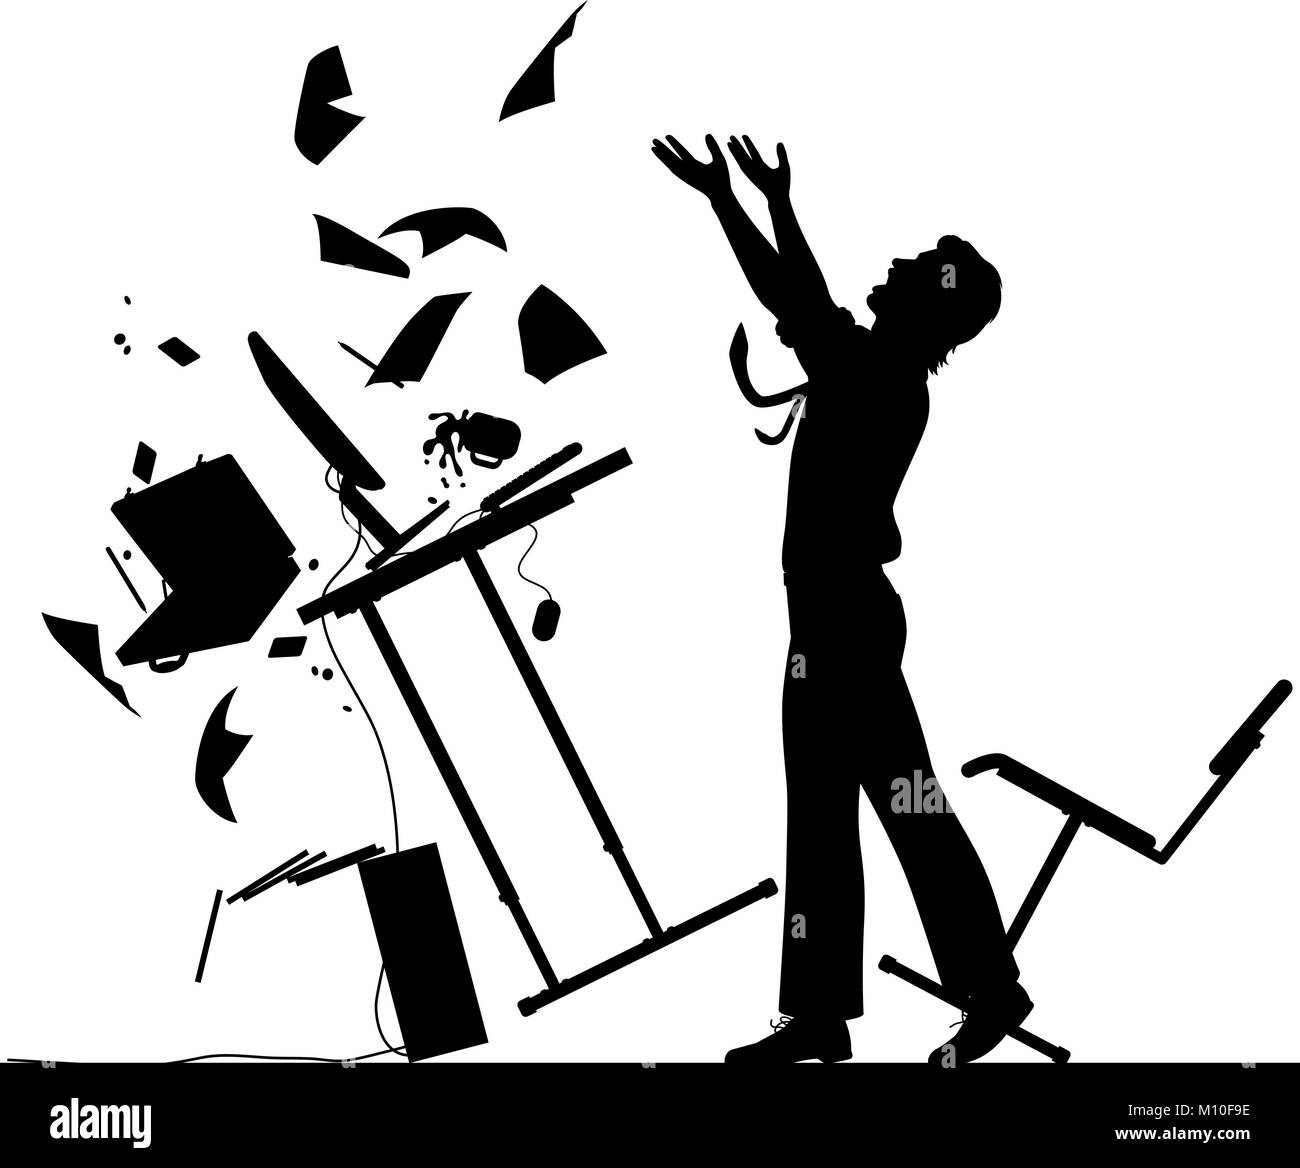 Editable vector silhouette illustration of a frustrated office worker throwing his desk over Stock Vector